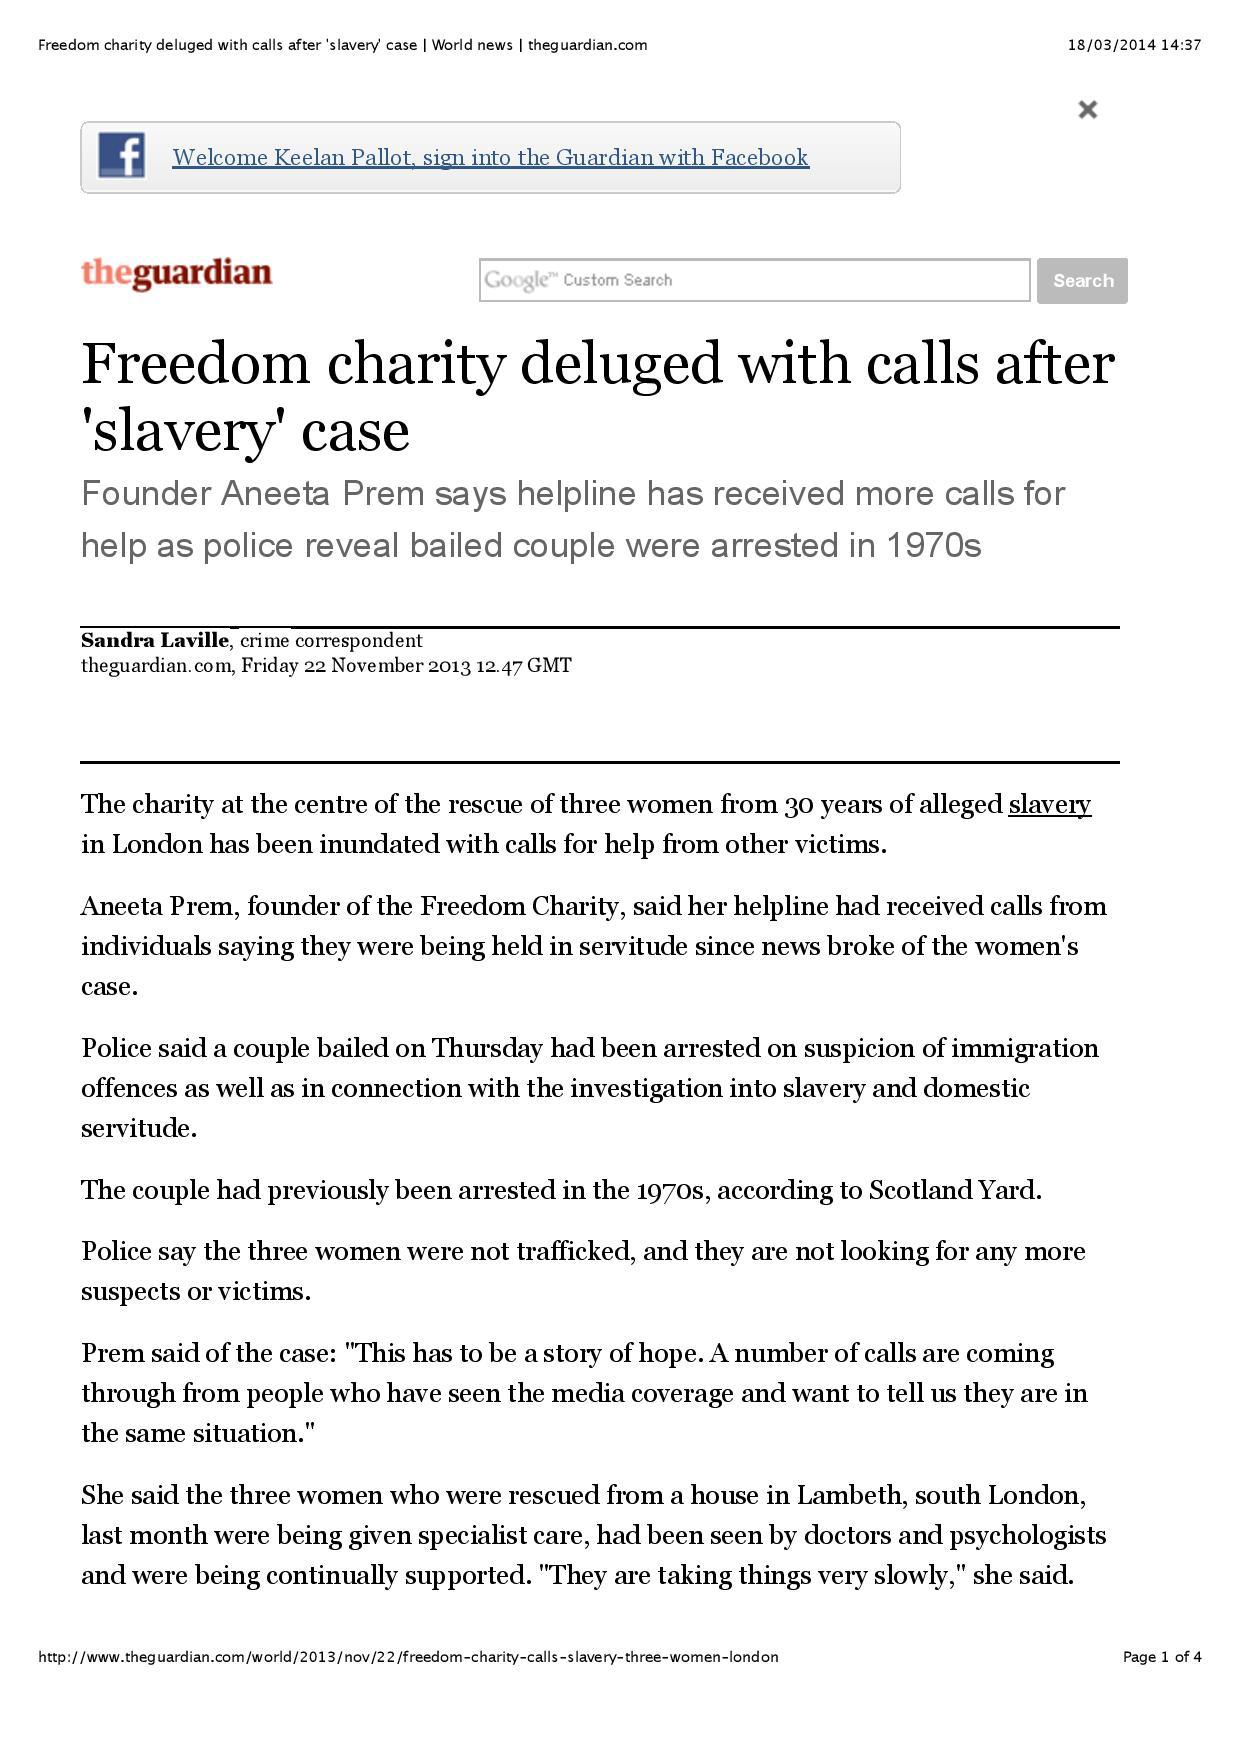 done-freedom-charity-deluged-with-calls-after-slavery-case-world-news-theguardian-com-page-001